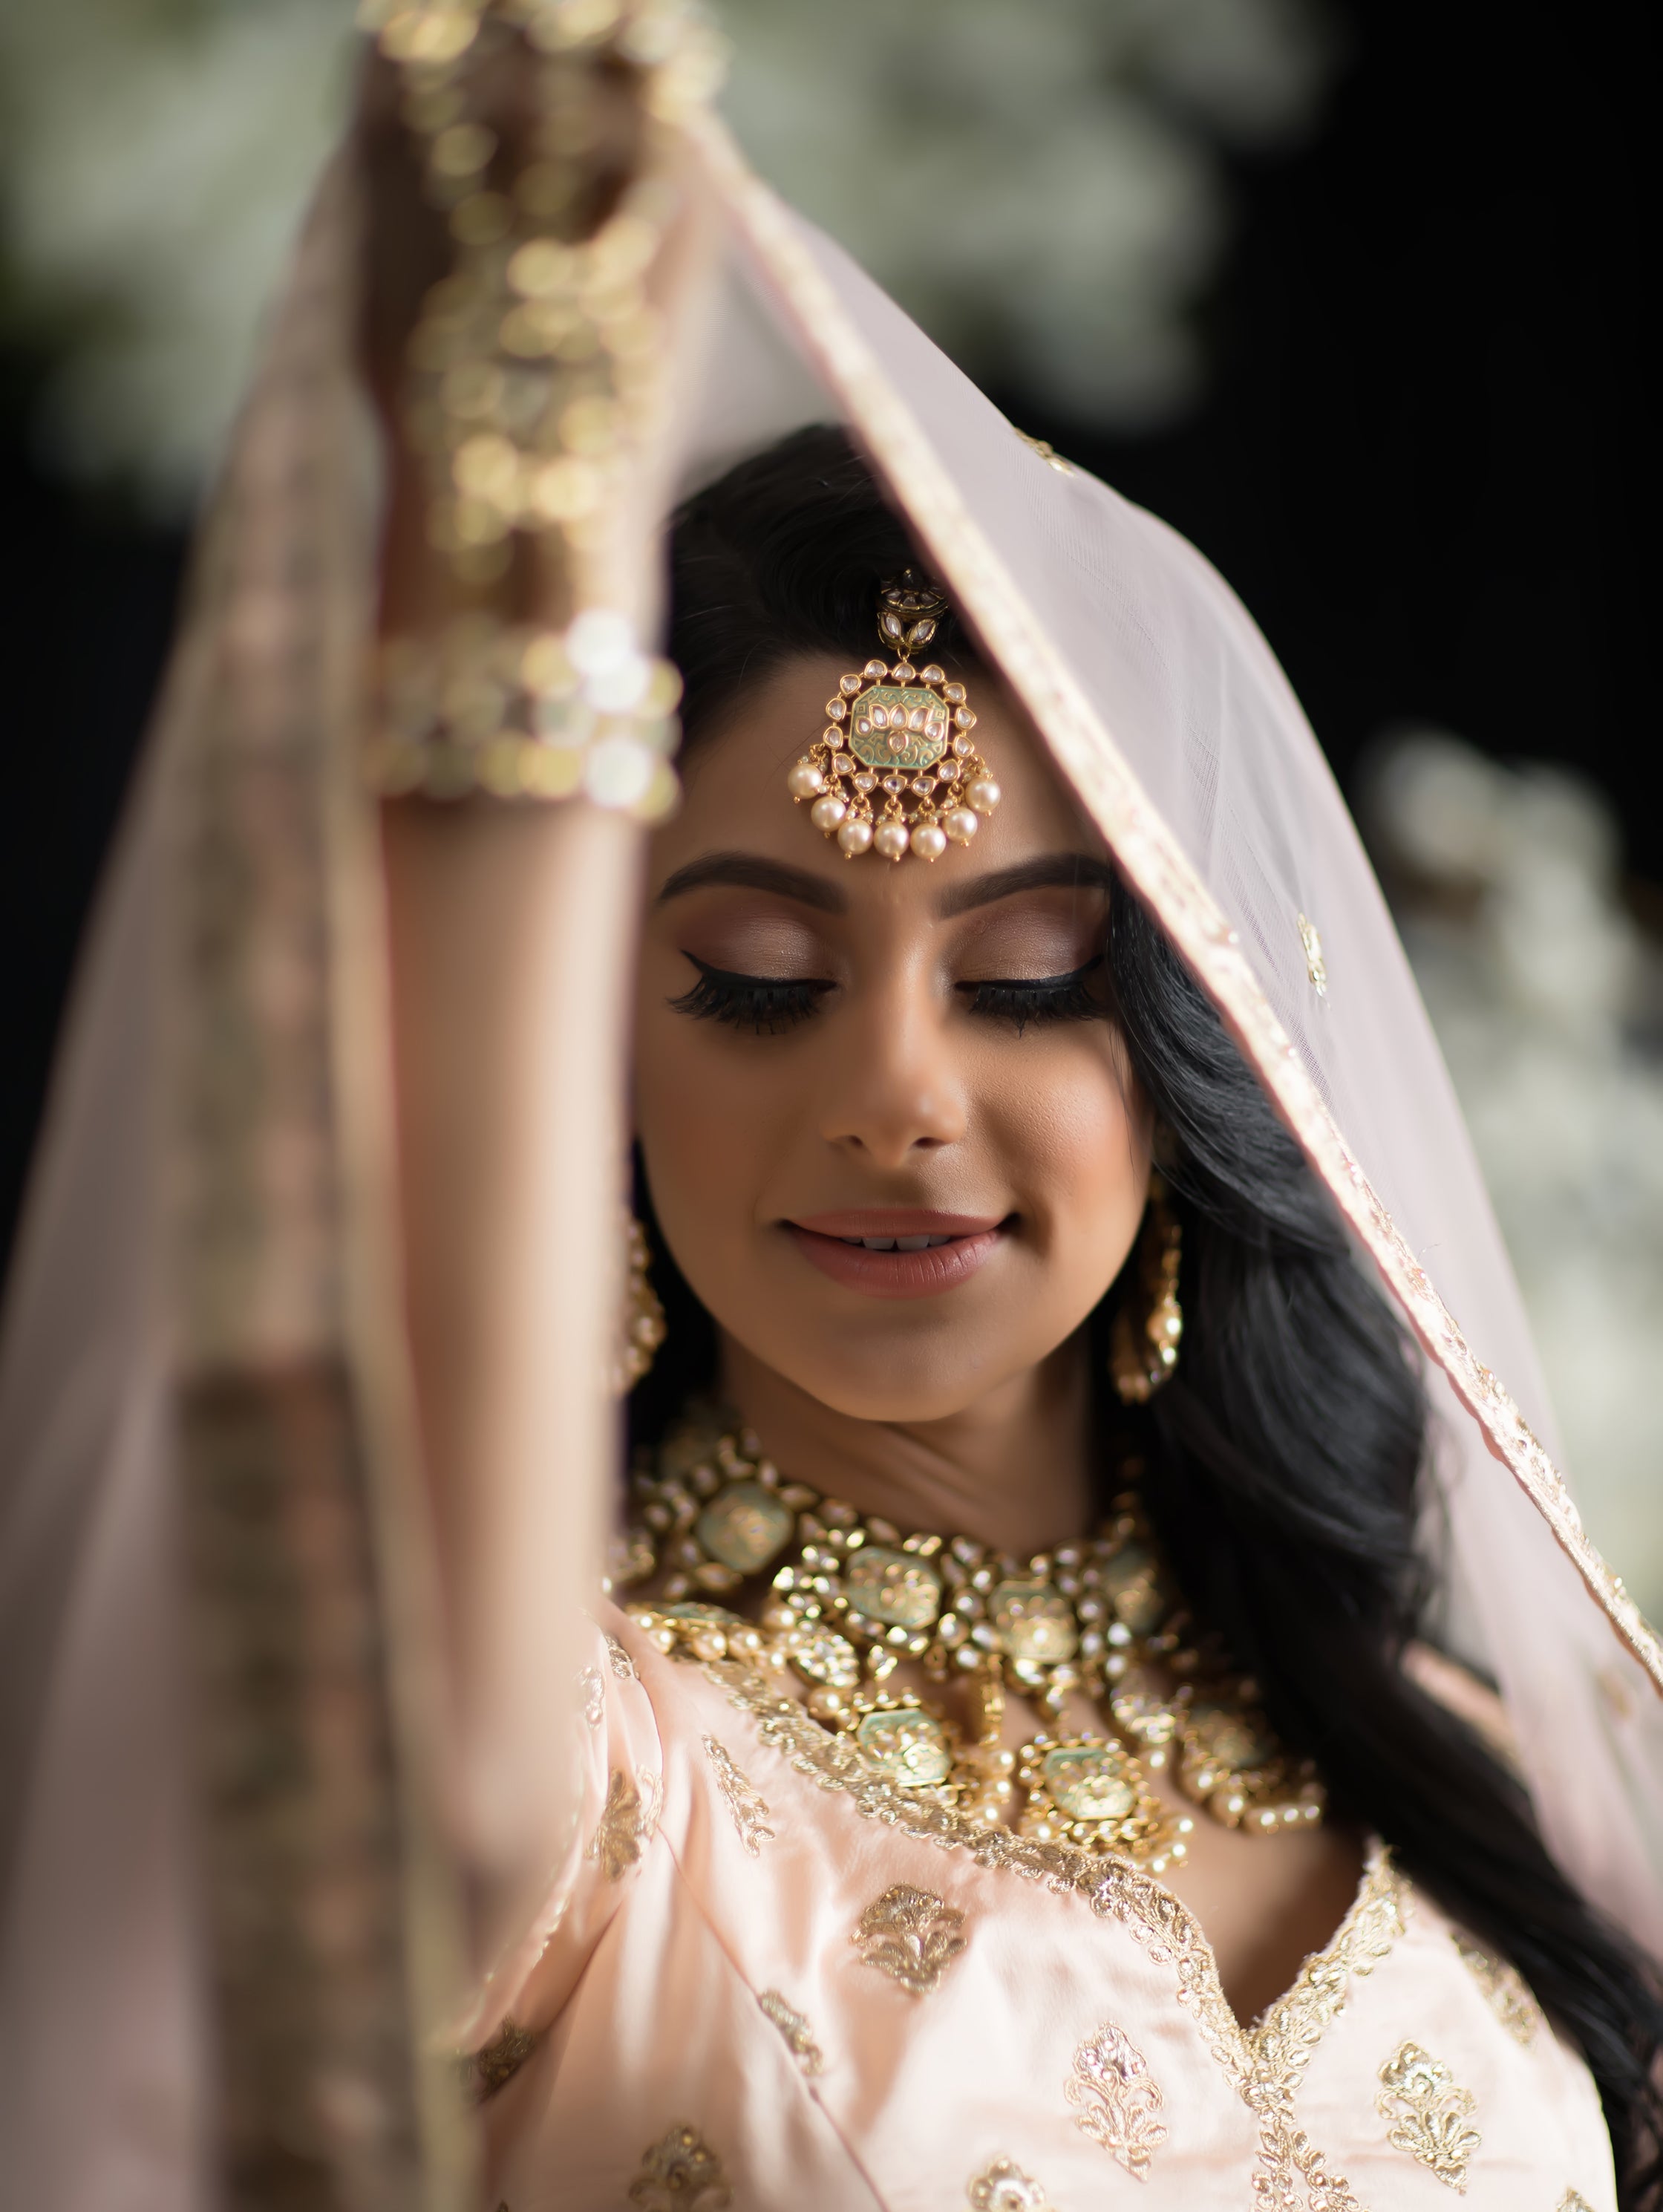 a traditional Lehenga dress in DC?” - PoPville